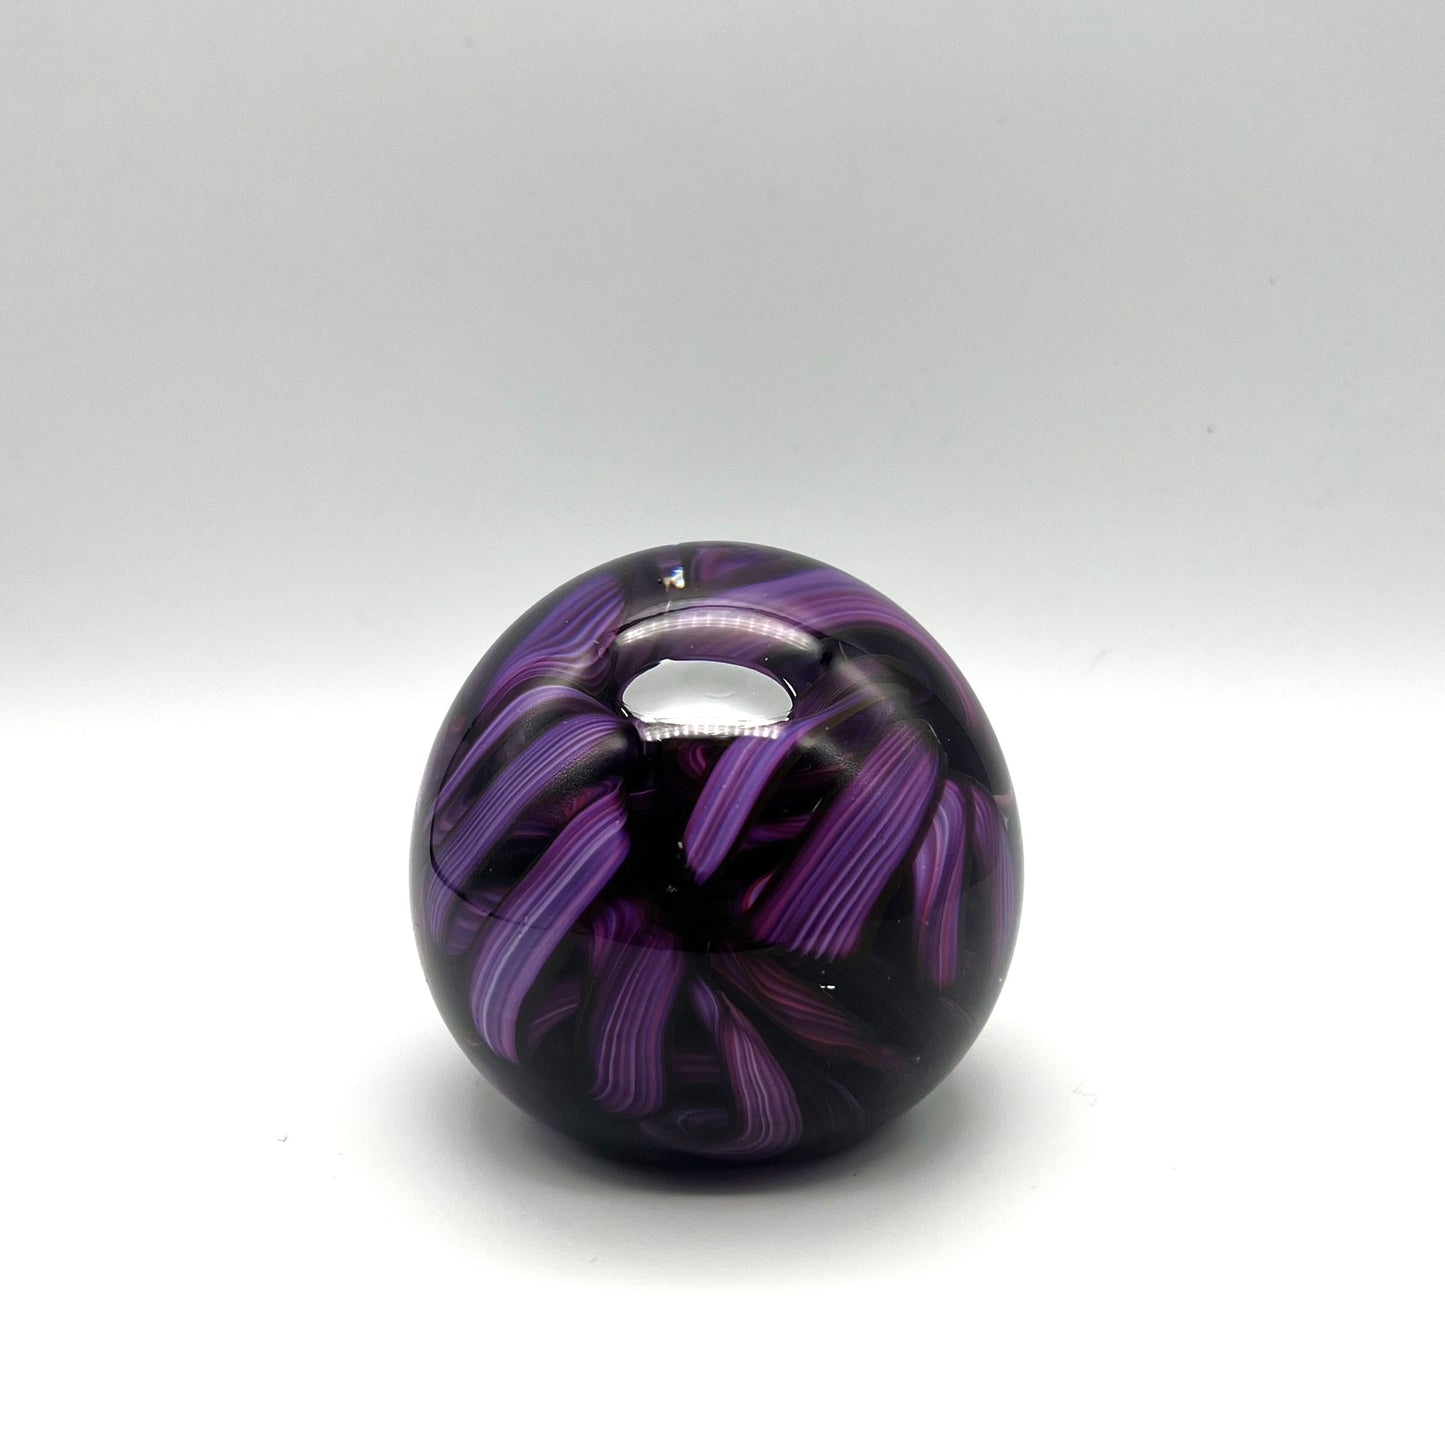 Ribbon Paperweight by Hudson Glass